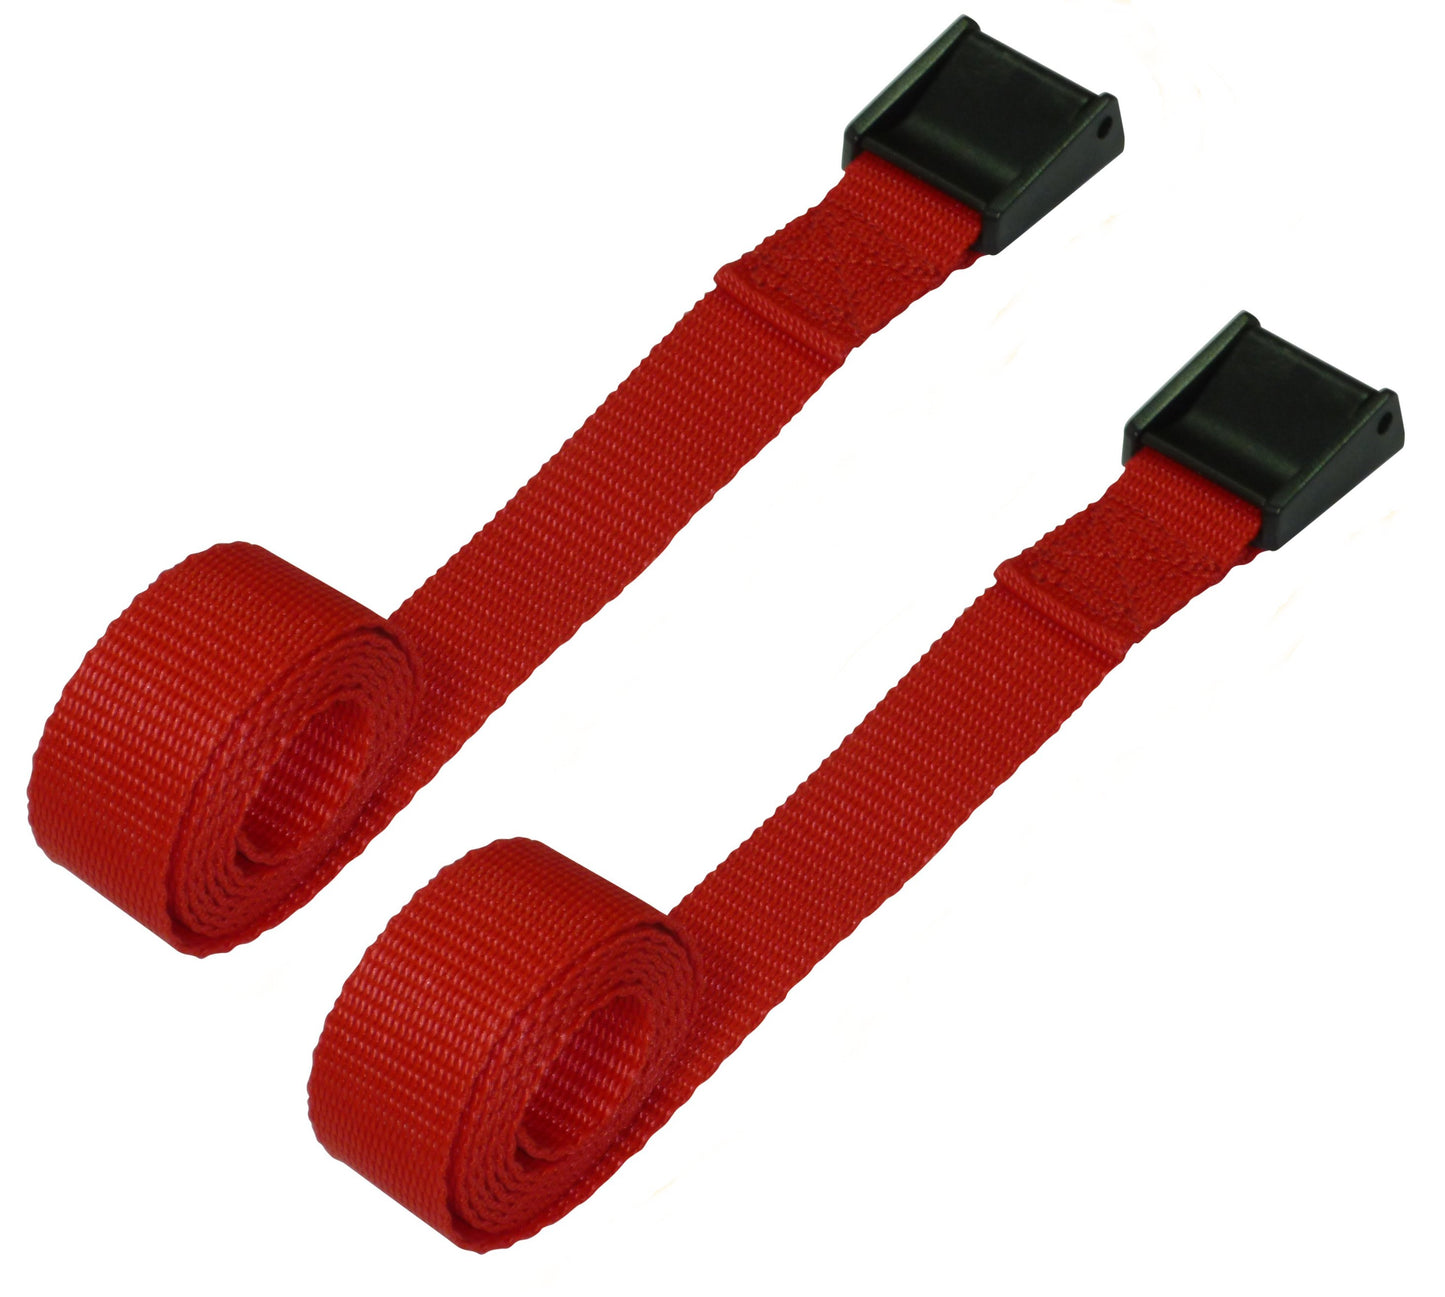 25mm Webbing Strap with Cam Buckle (Pair)